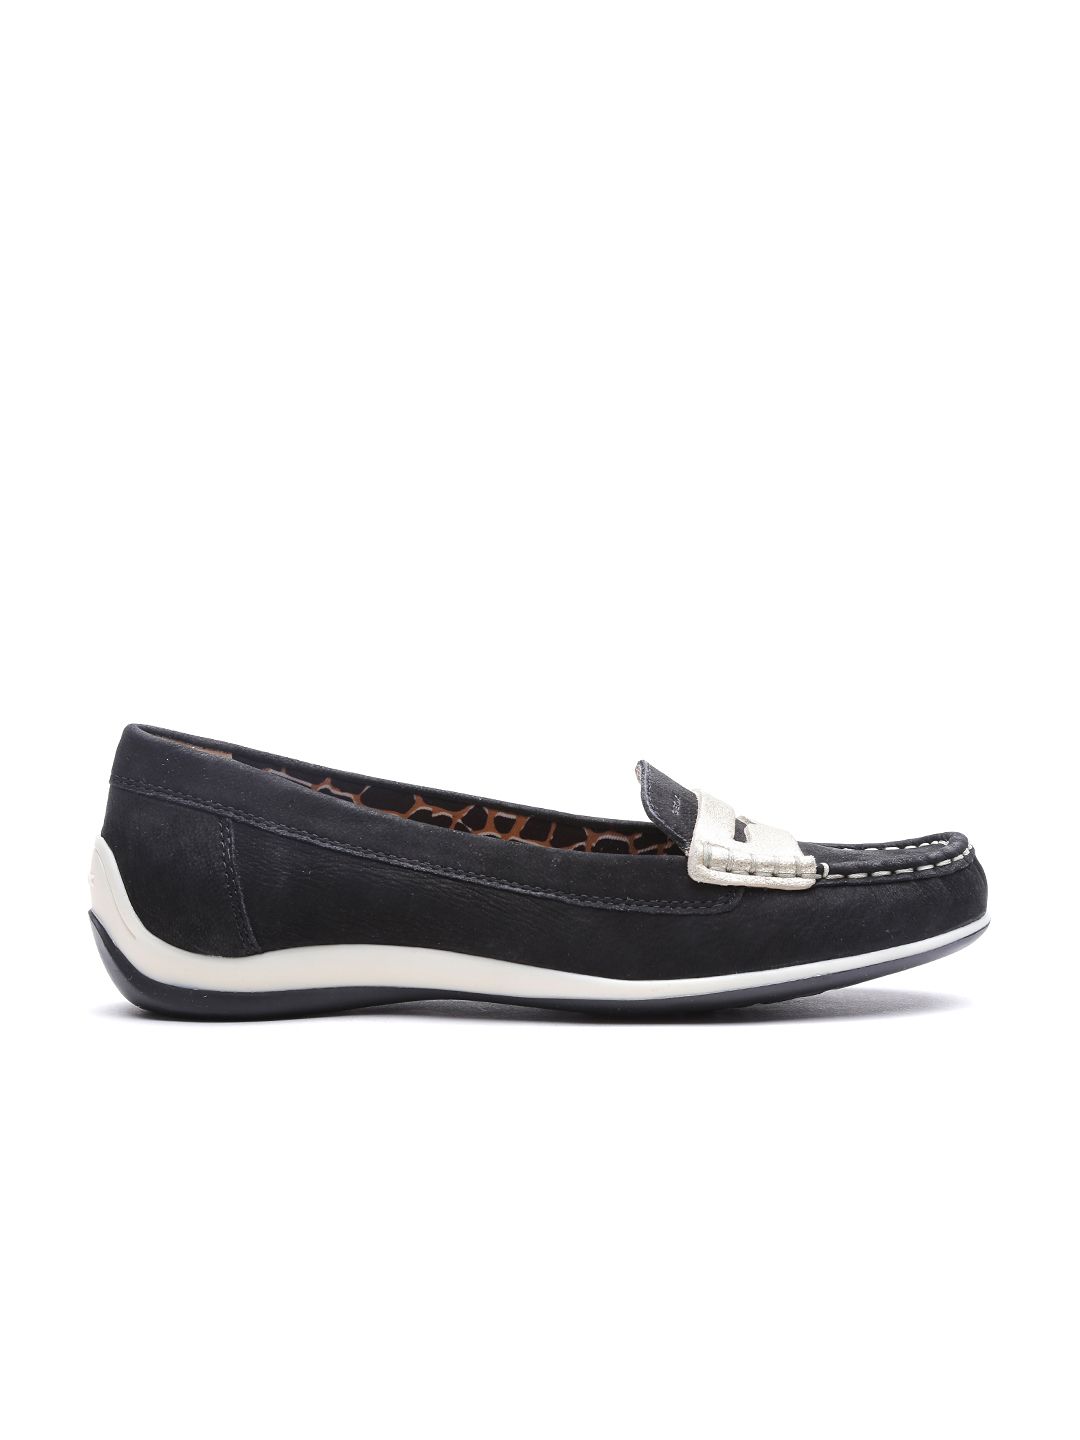 GEOX Respira Women Black Breathable Italian Patent Leather Loafers Price in India